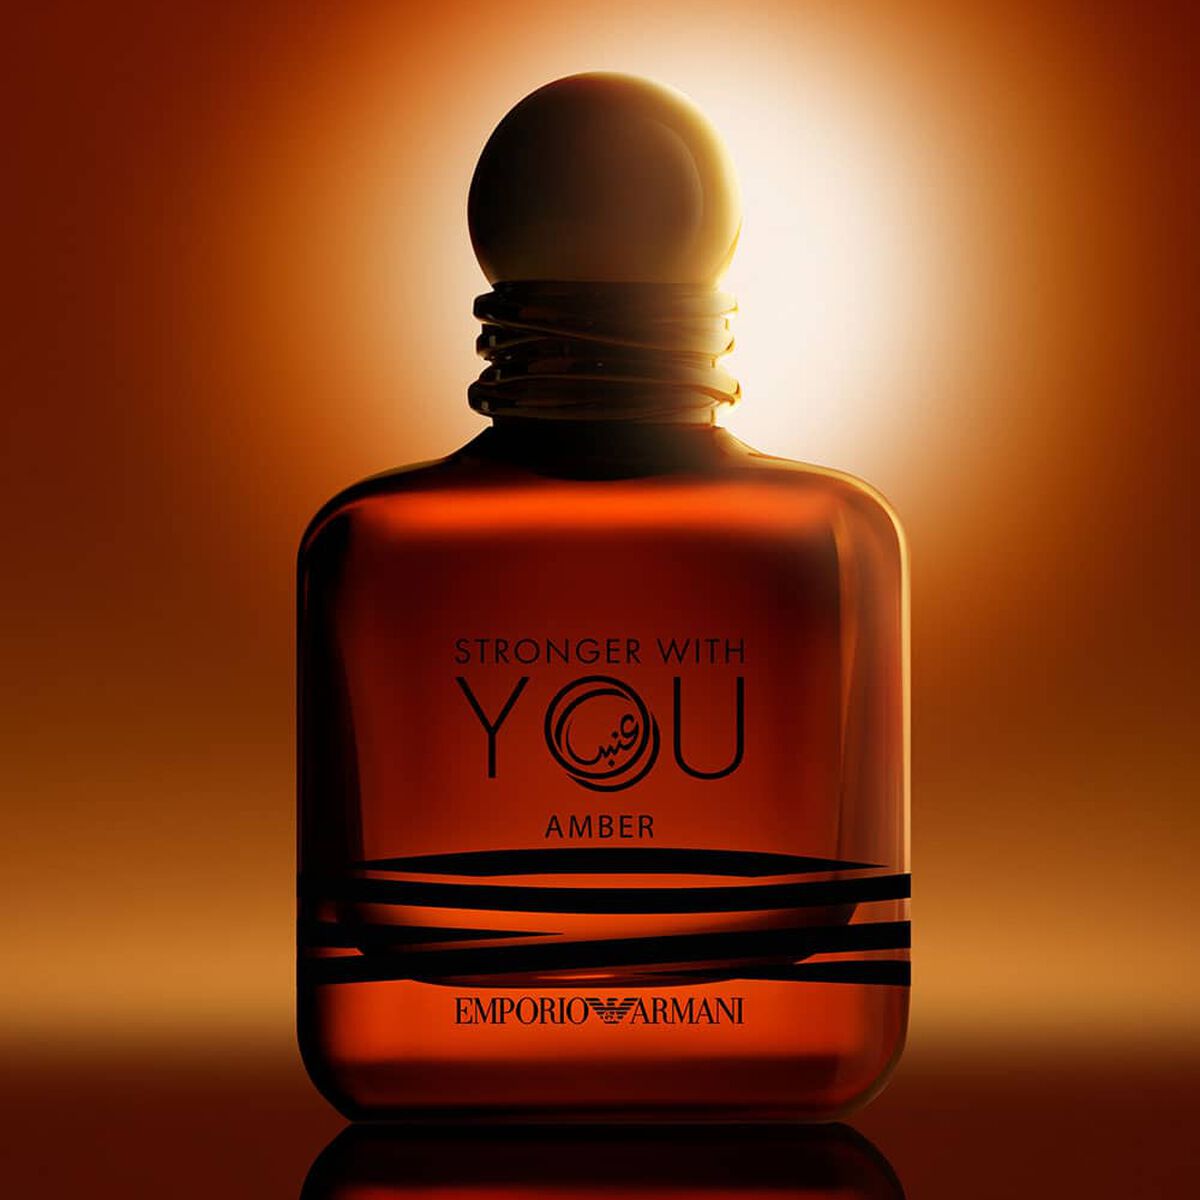 EMPORIO ARMANI STRONGER WITH YOU AMBER